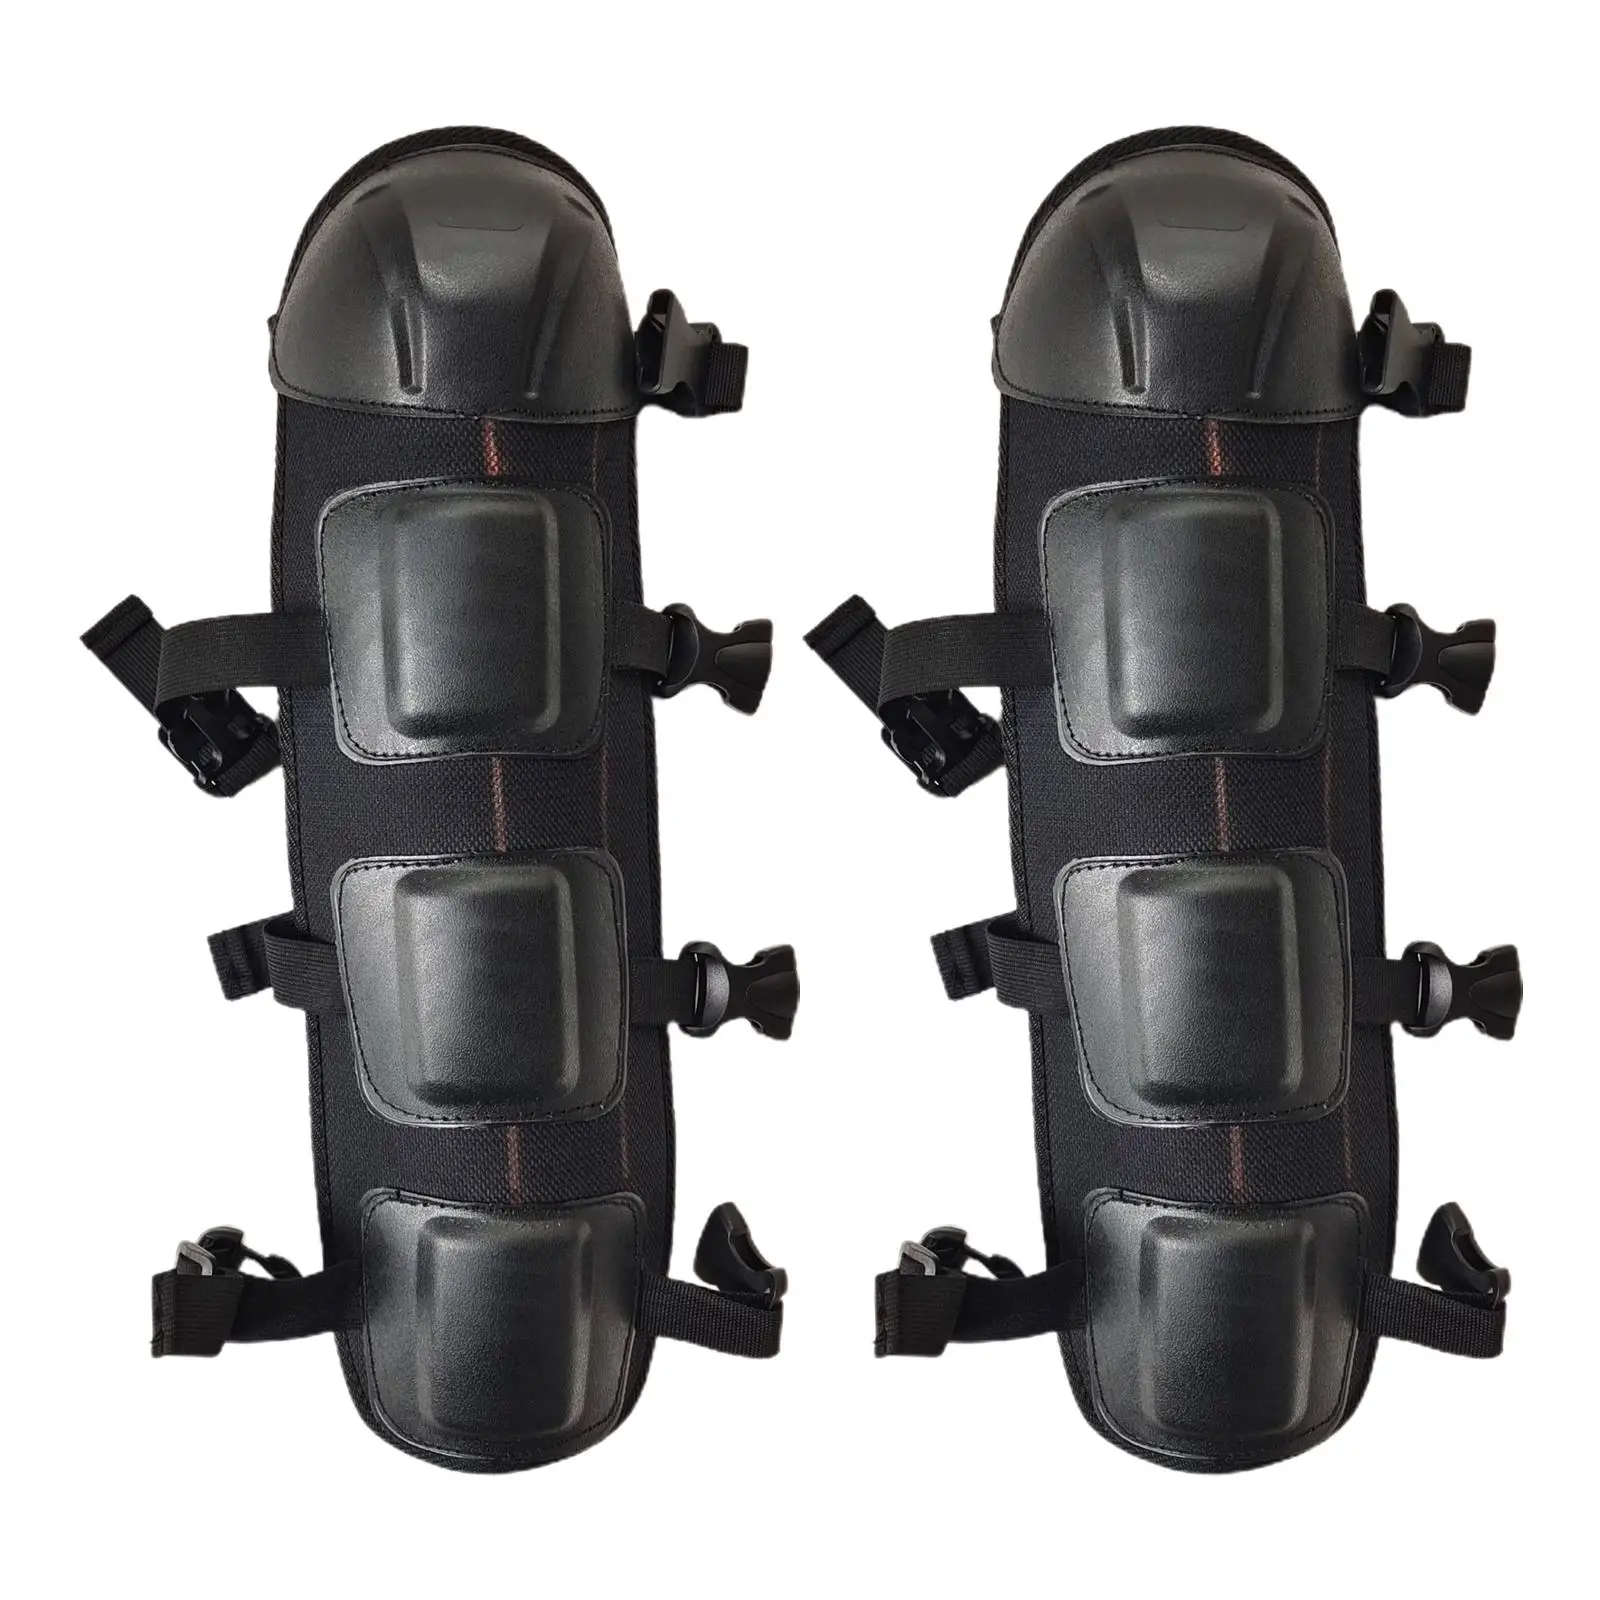 Knee Pads Kneelet Protective Gear Protection Knees Soft Motorcycle Protective for Scooter Mountain Bikes Work Safety Fitments